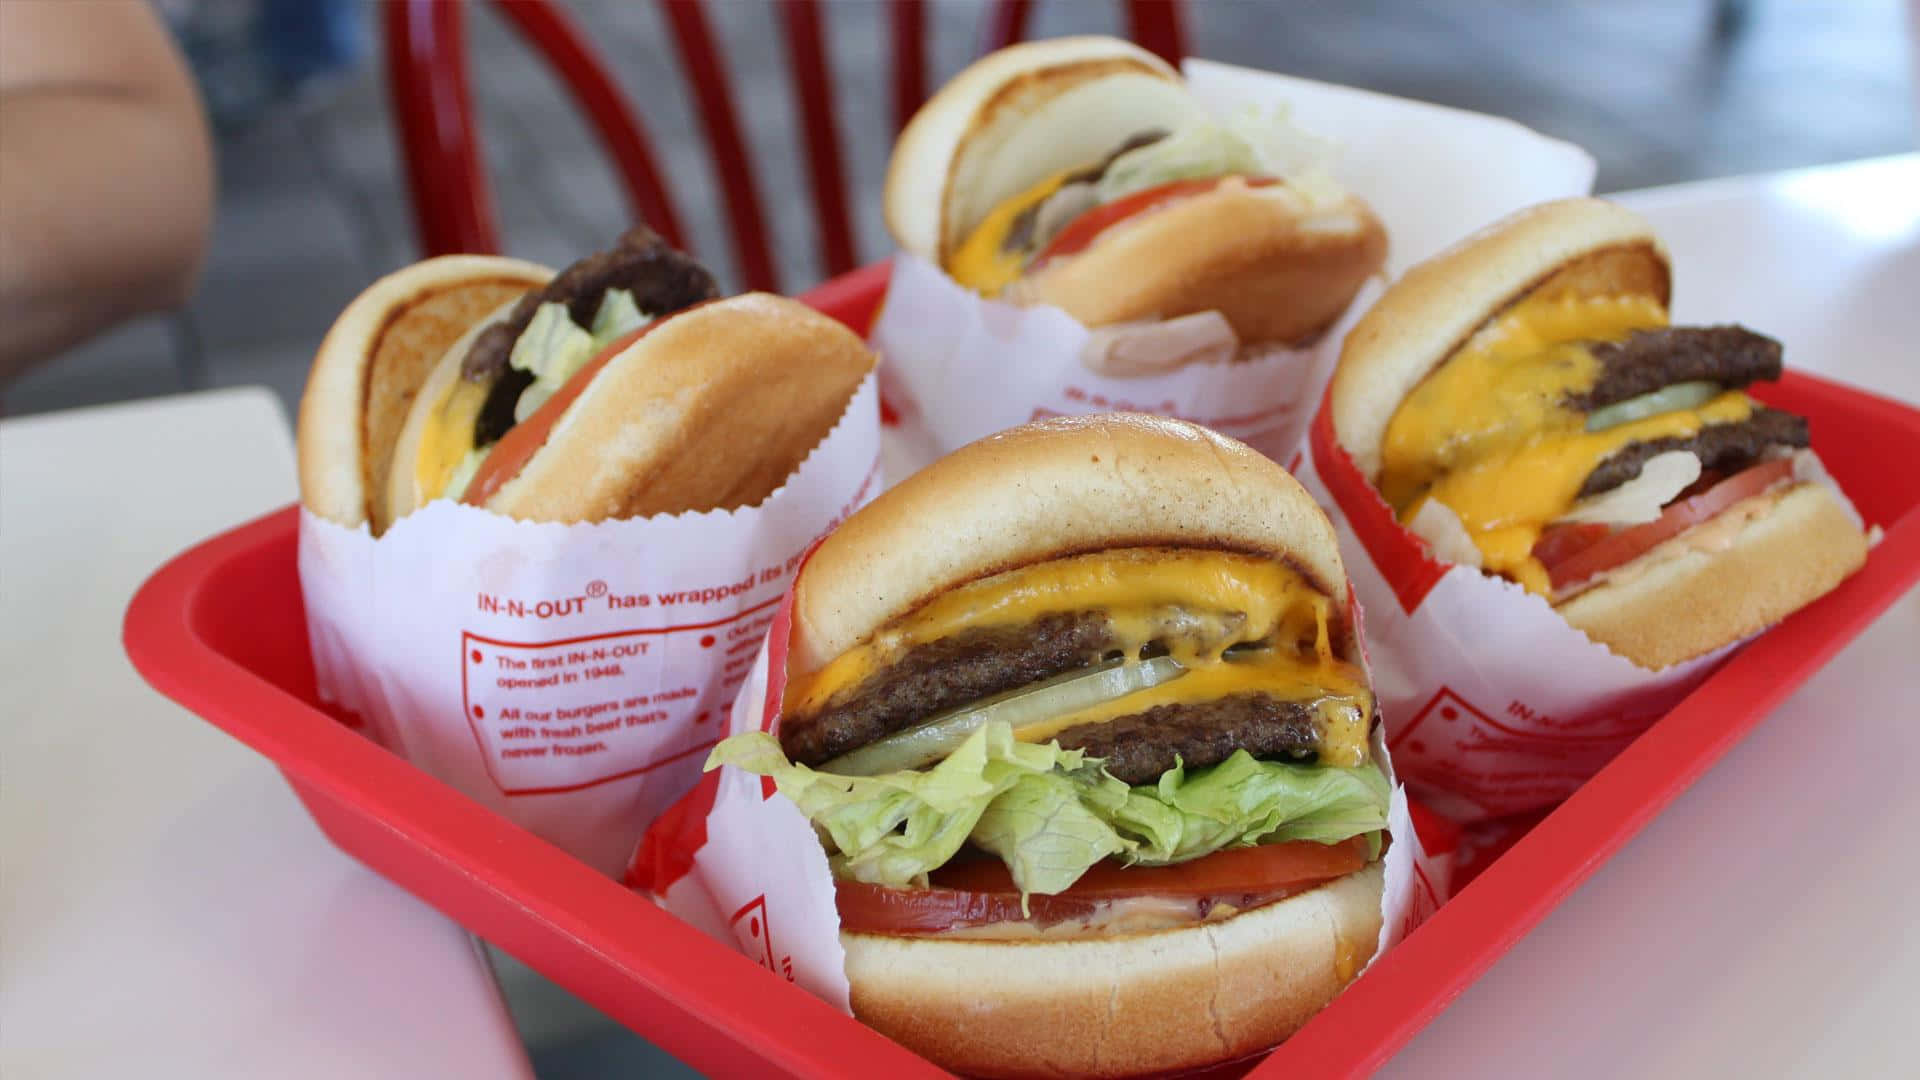 A Tray Of Hamburgers In A Red Basket Wallpaper